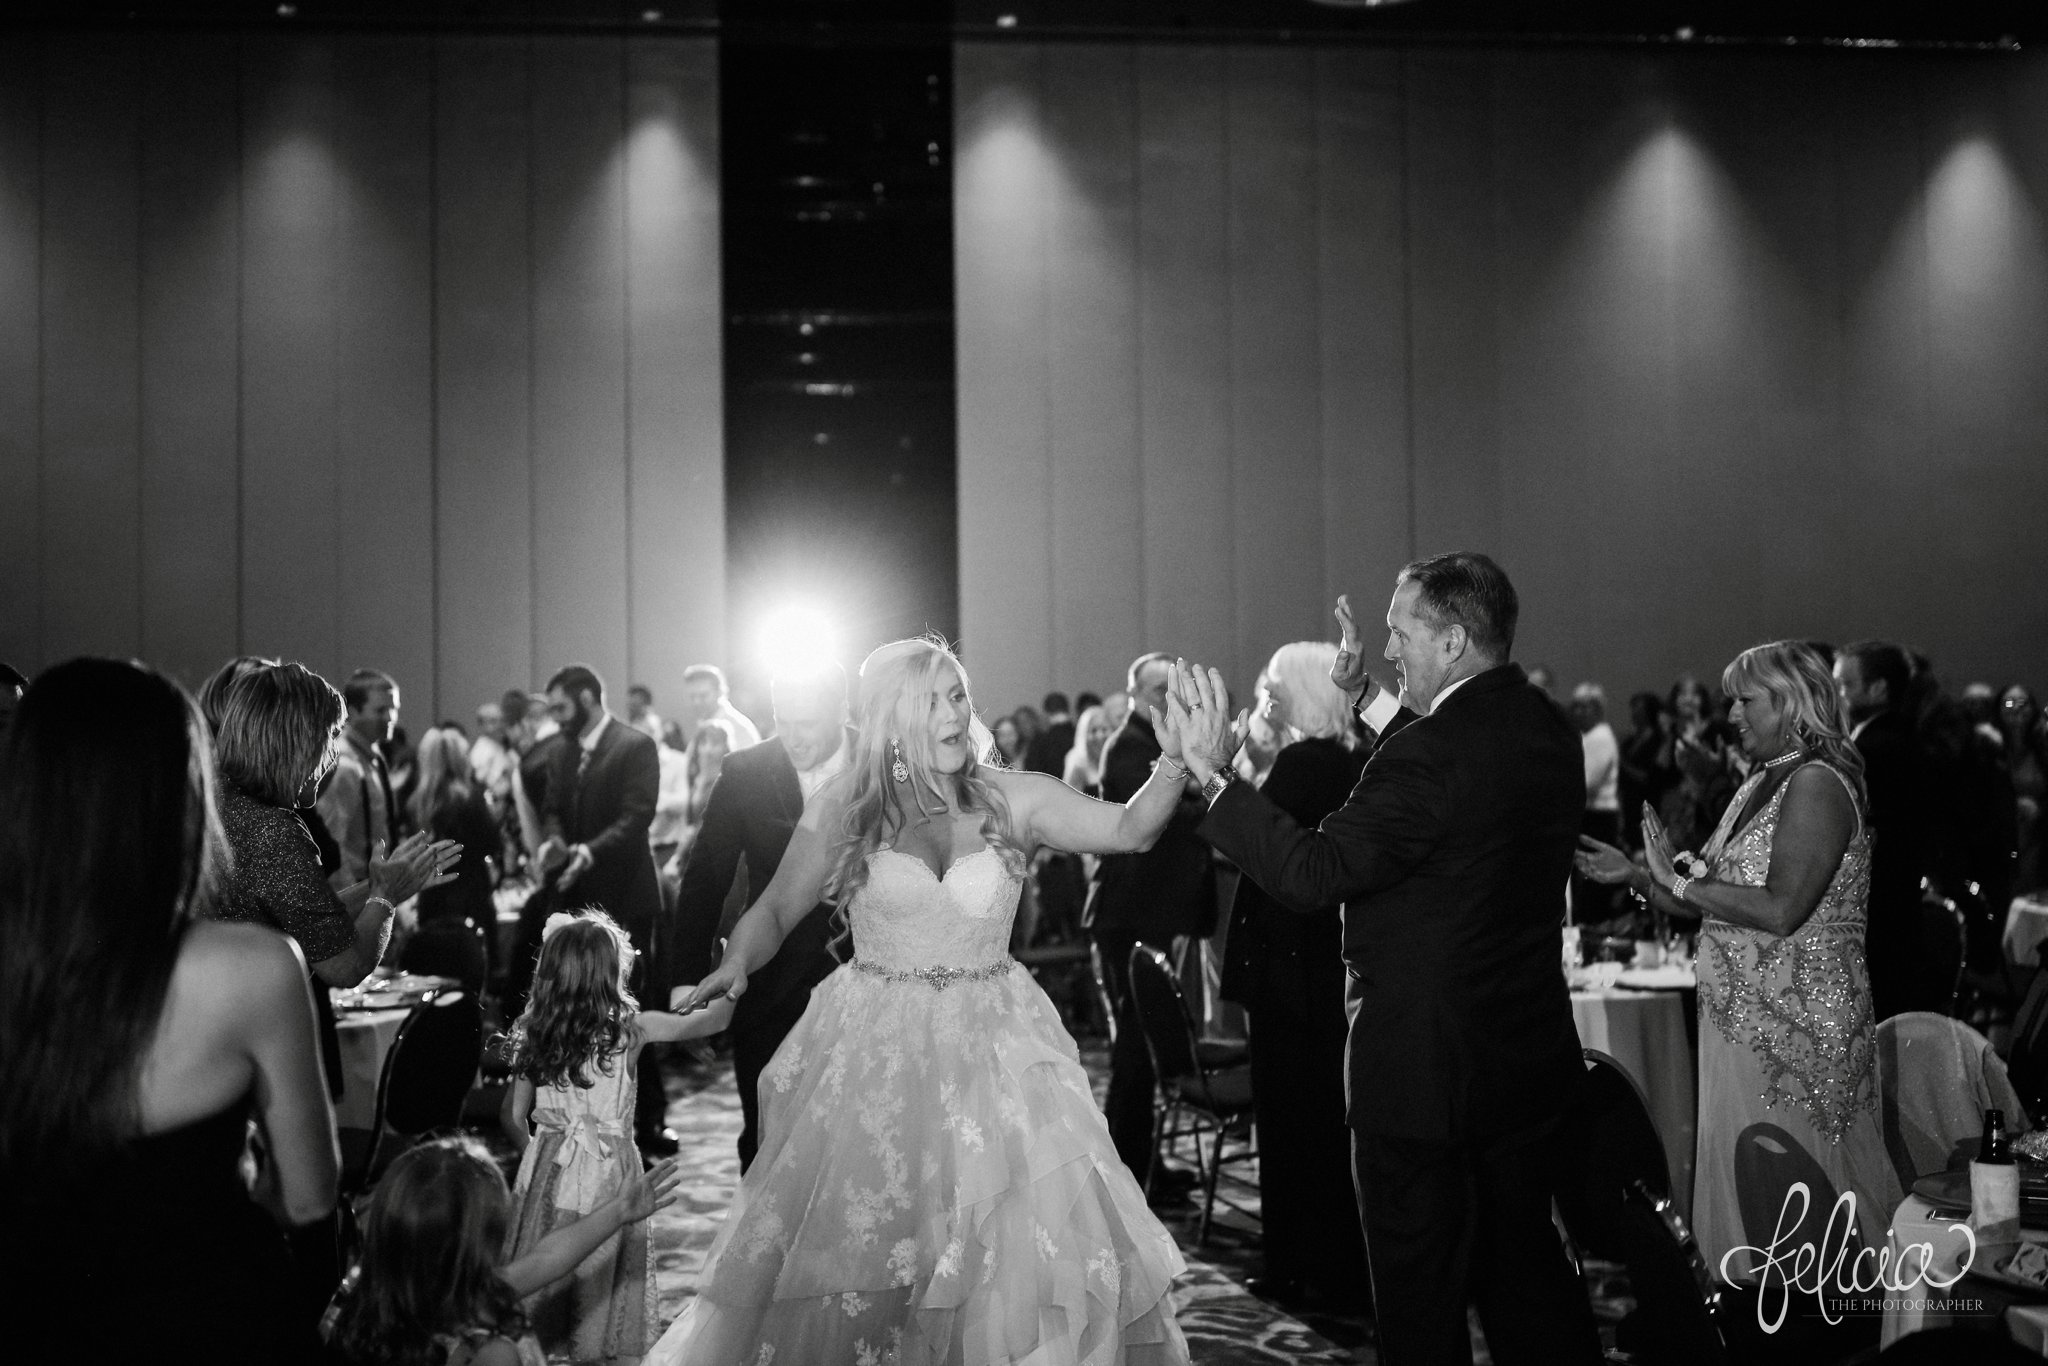 images by feliciathephotographer.com | wedding photographer | downtown kansas city | reception | grand entrance | high five | father daughter | black and white | 